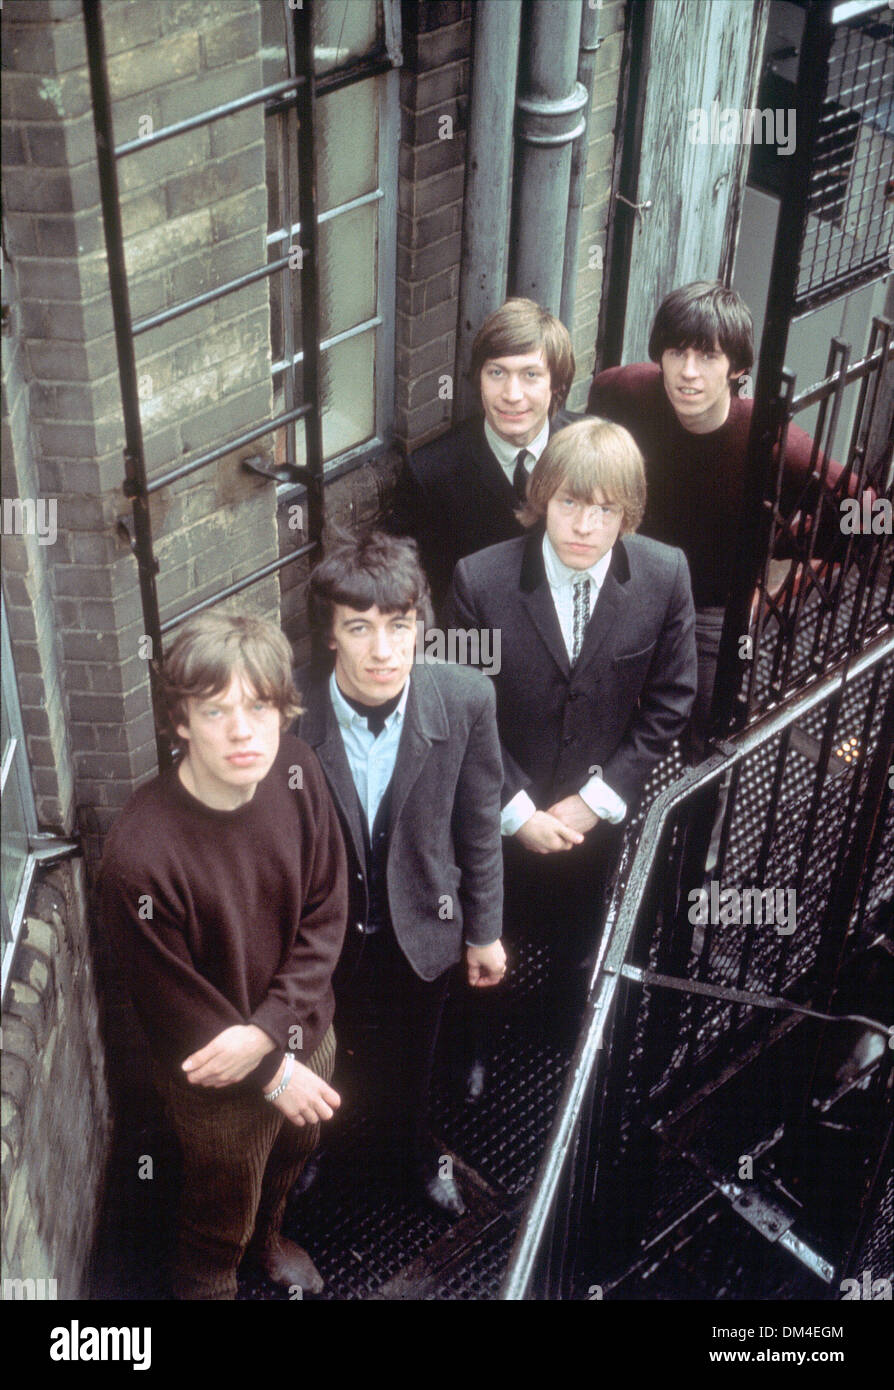 ROLLING STONES UK group in 1963. From left: Mick Jagger, Bill Wyman, Charlie Watts, Brian Jones, Keith Richards. Stock Photo